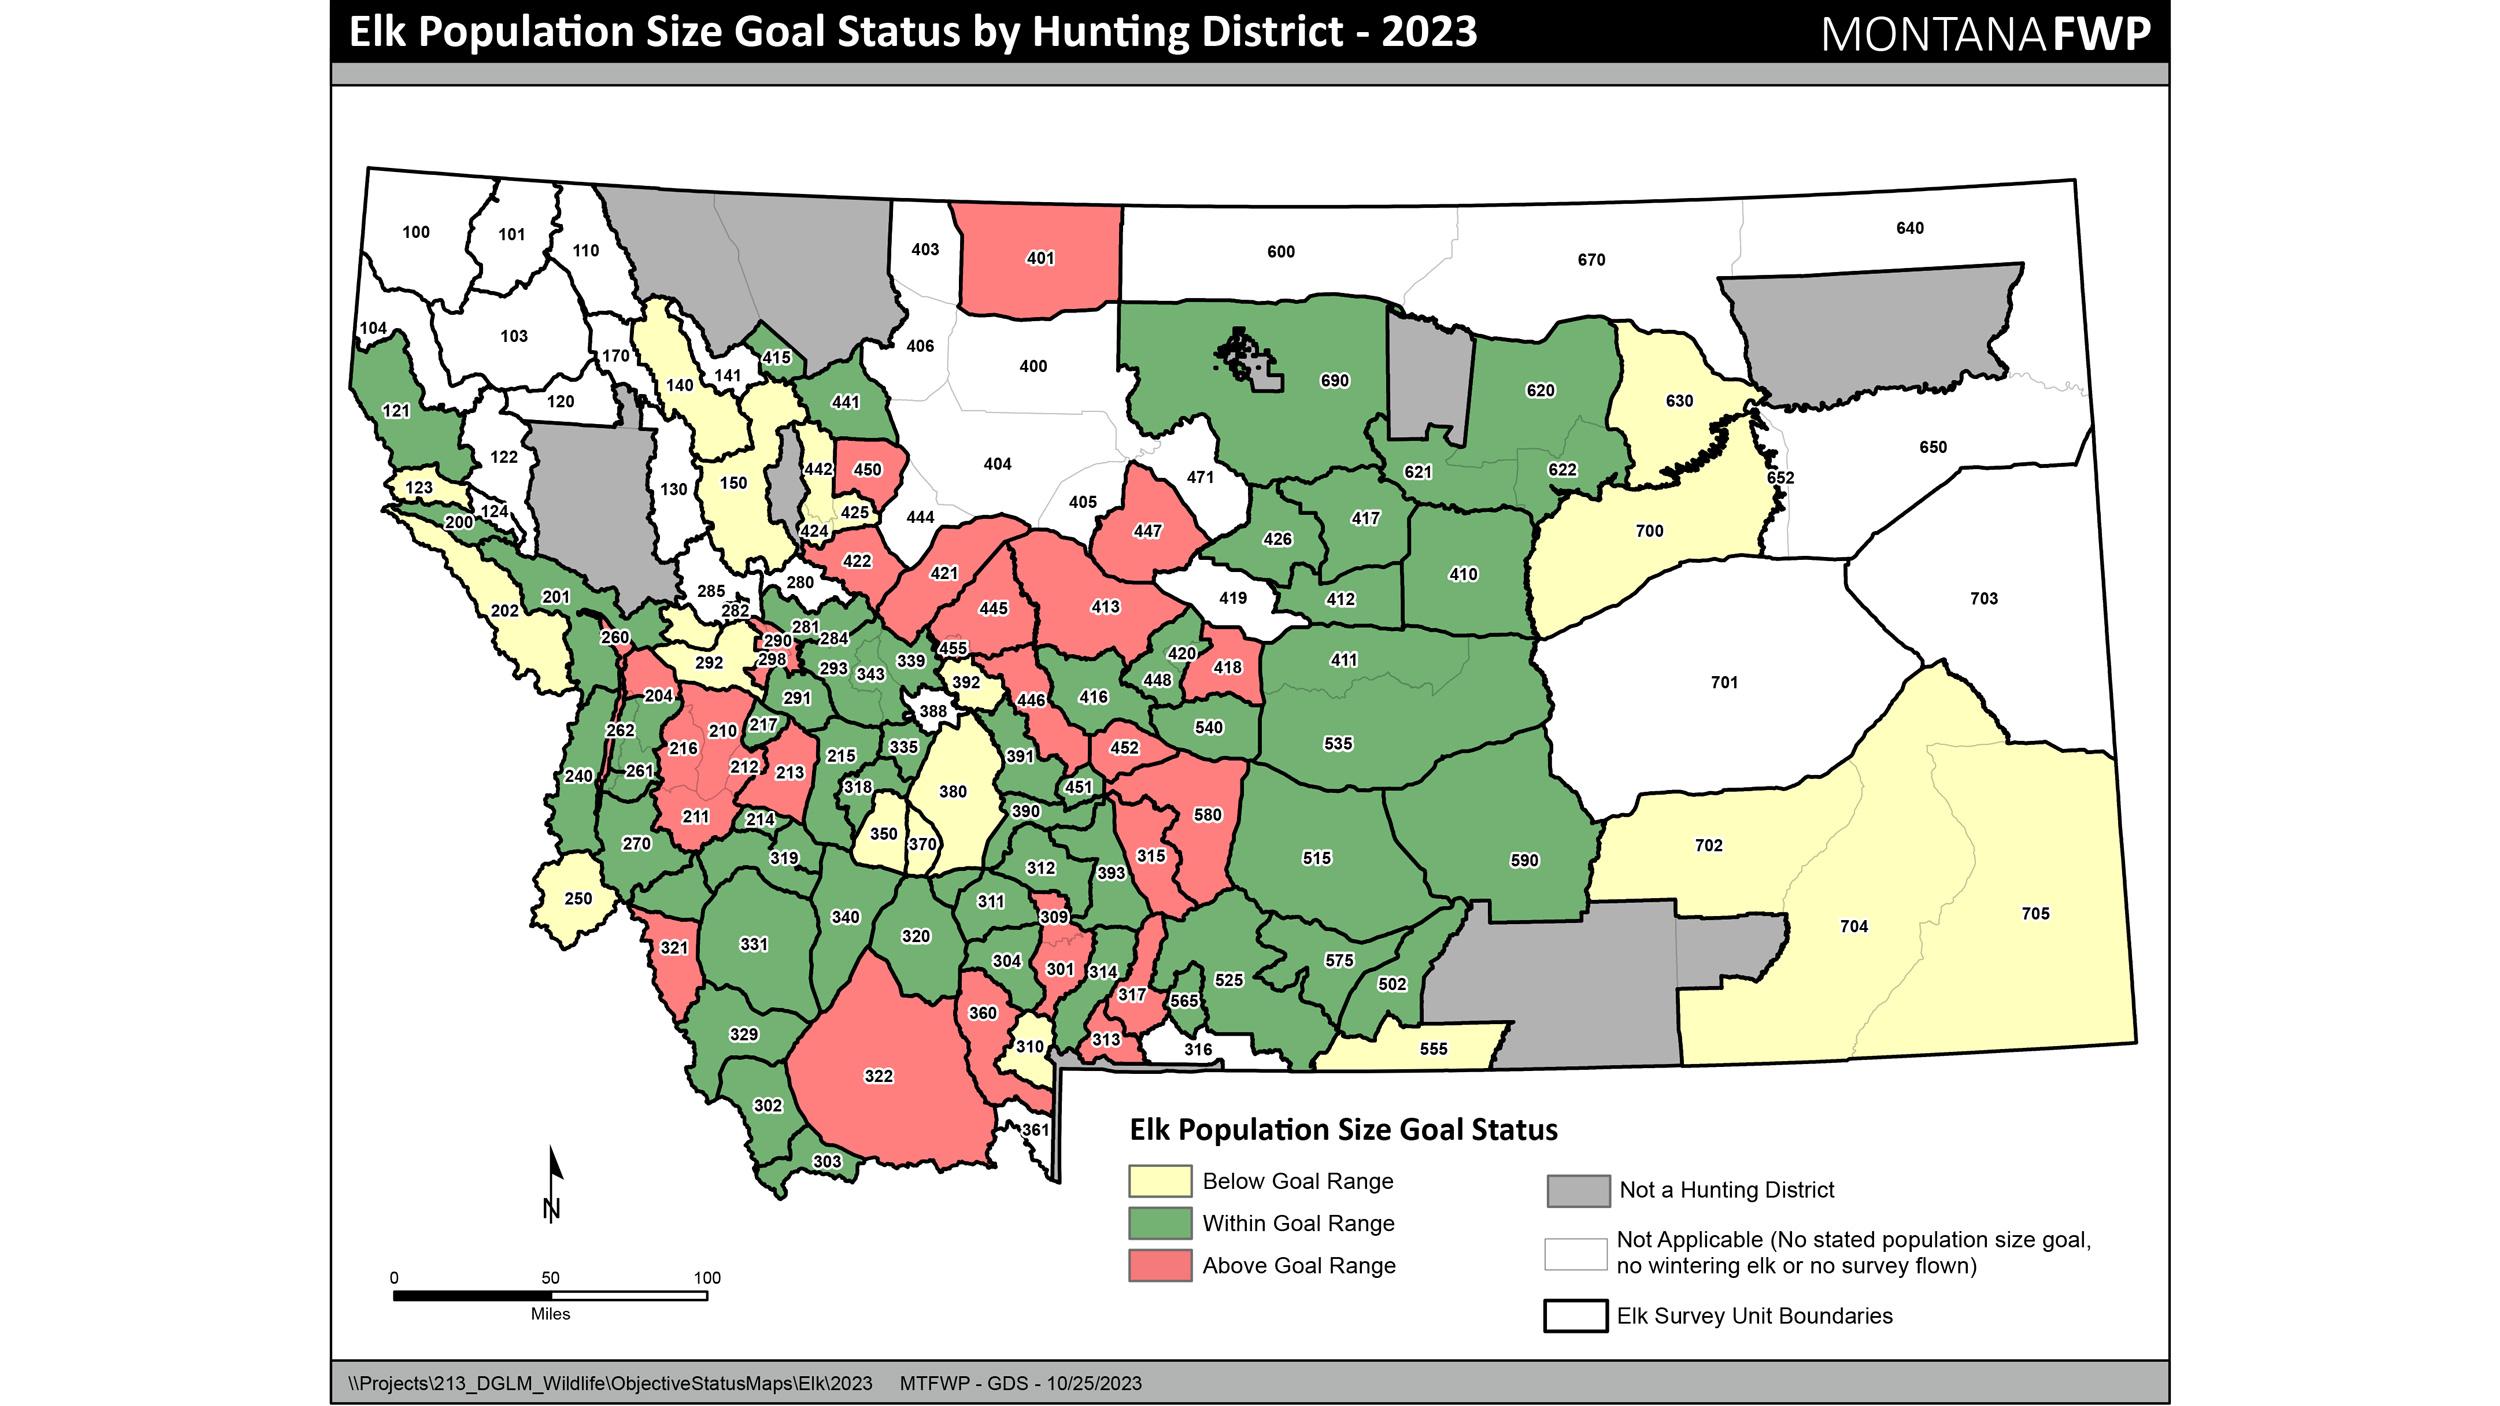 Montana elk population size goal status map by hunting district 2023